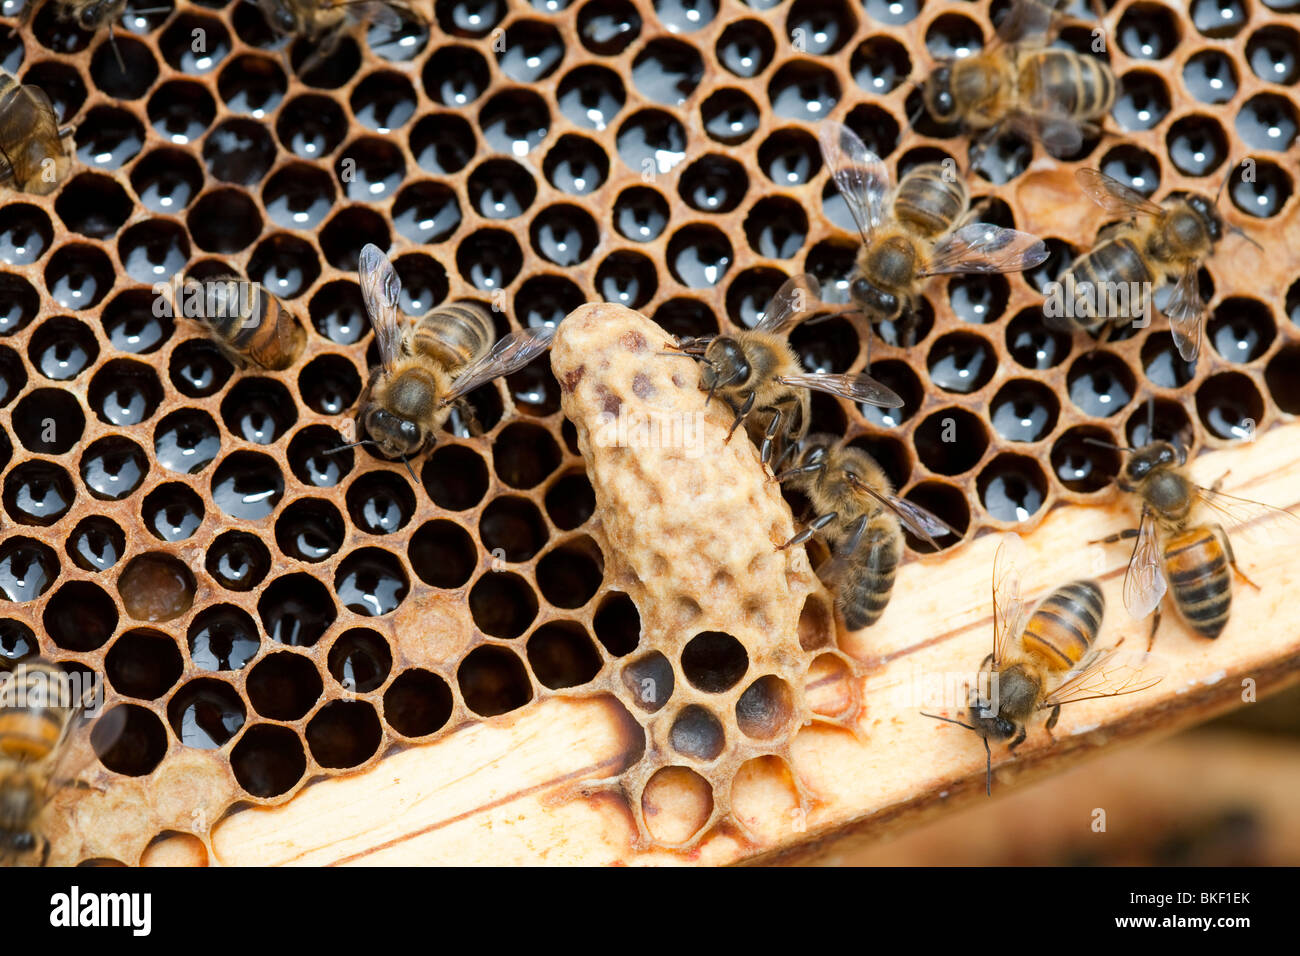 A Queen cell in a beehive in Cockermouth, Cumbria, UK that has been infected and damaged by the Varoa mite. Stock Photo